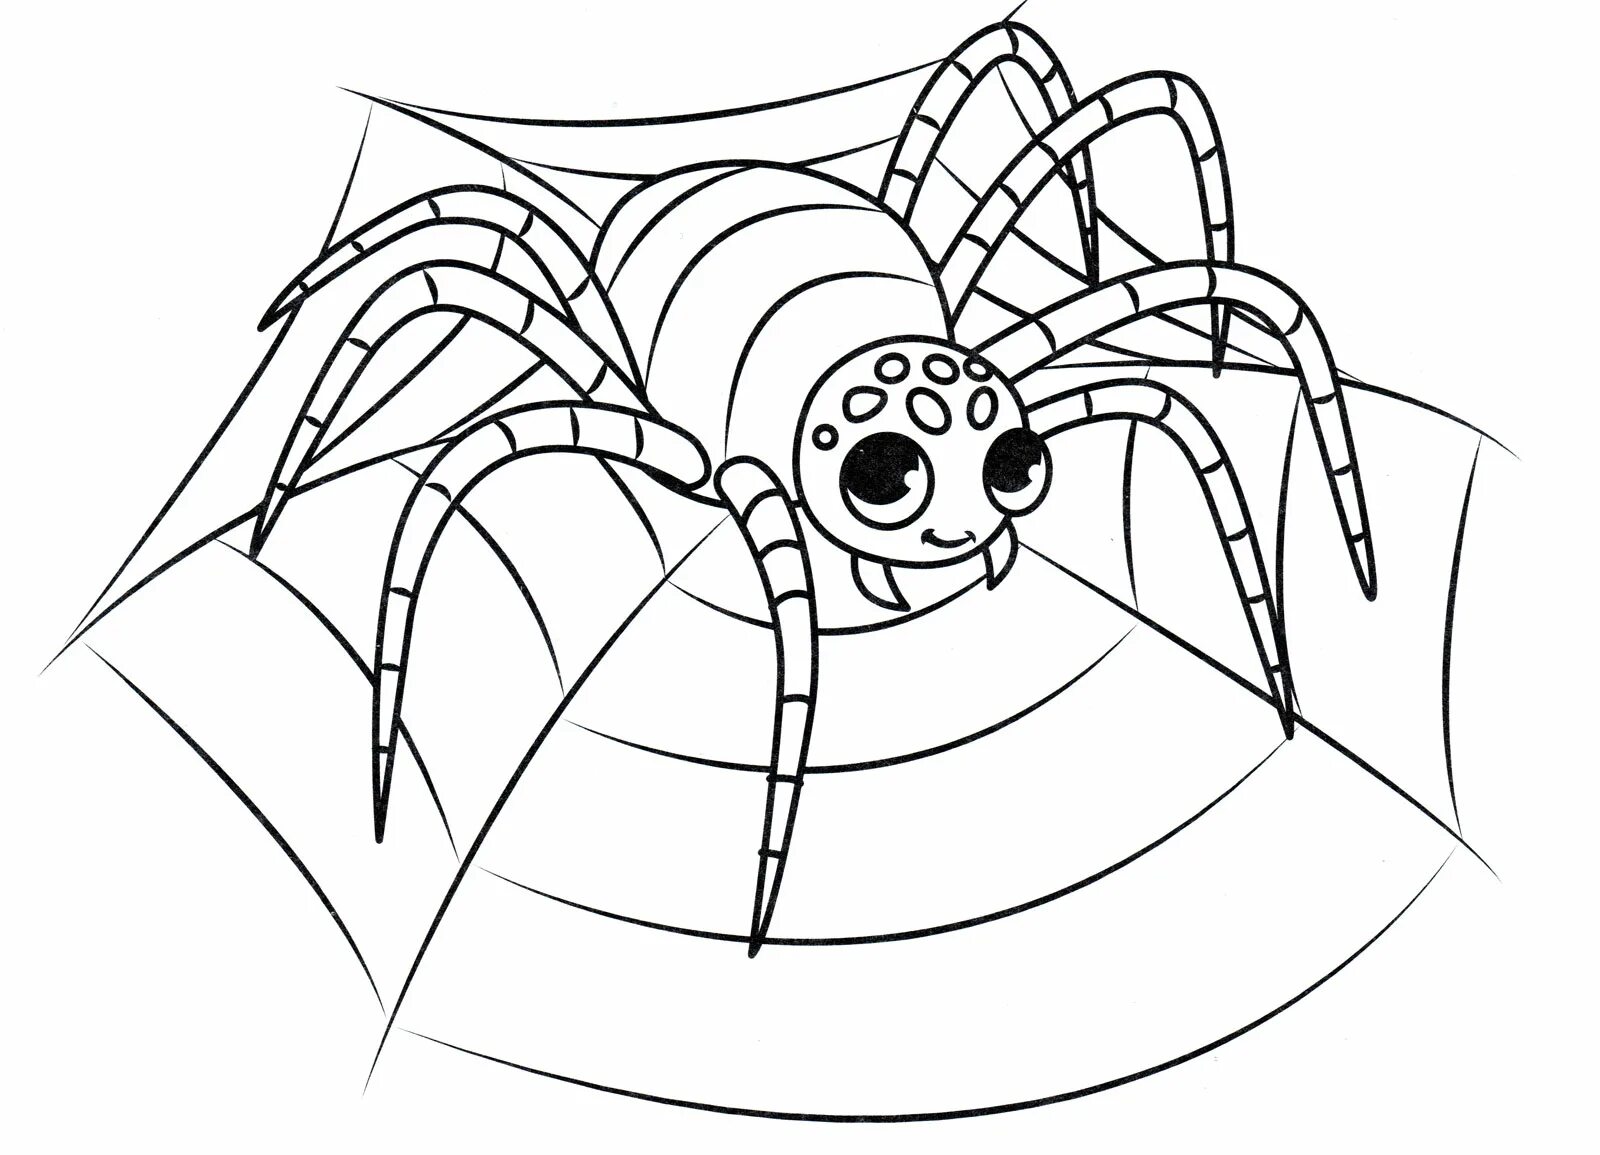 Animated spider coloring page for juniors